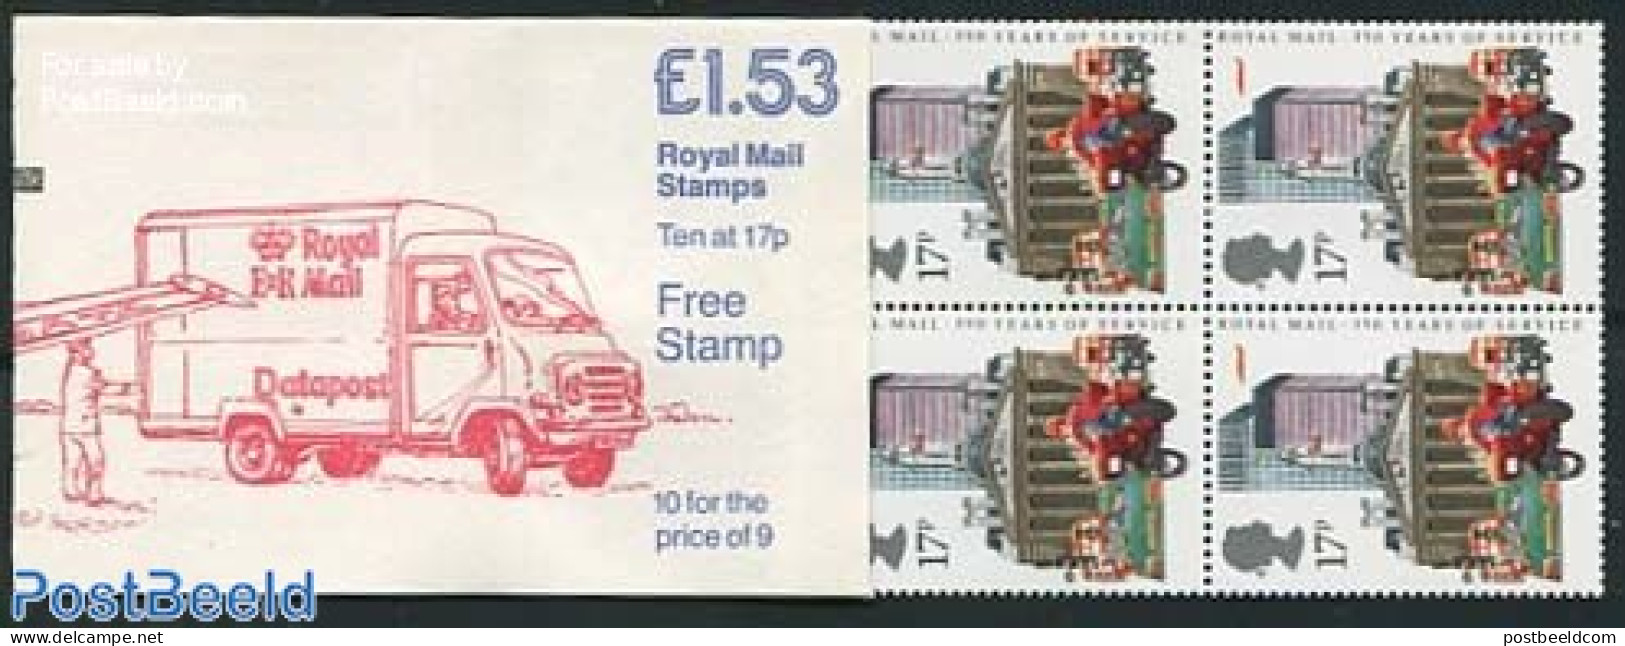 Great Britain 1985 Booklet, Datapost Service, Mint NH, Transport - Post - Stamp Booklets - Automobiles - Motorcycles - Unused Stamps